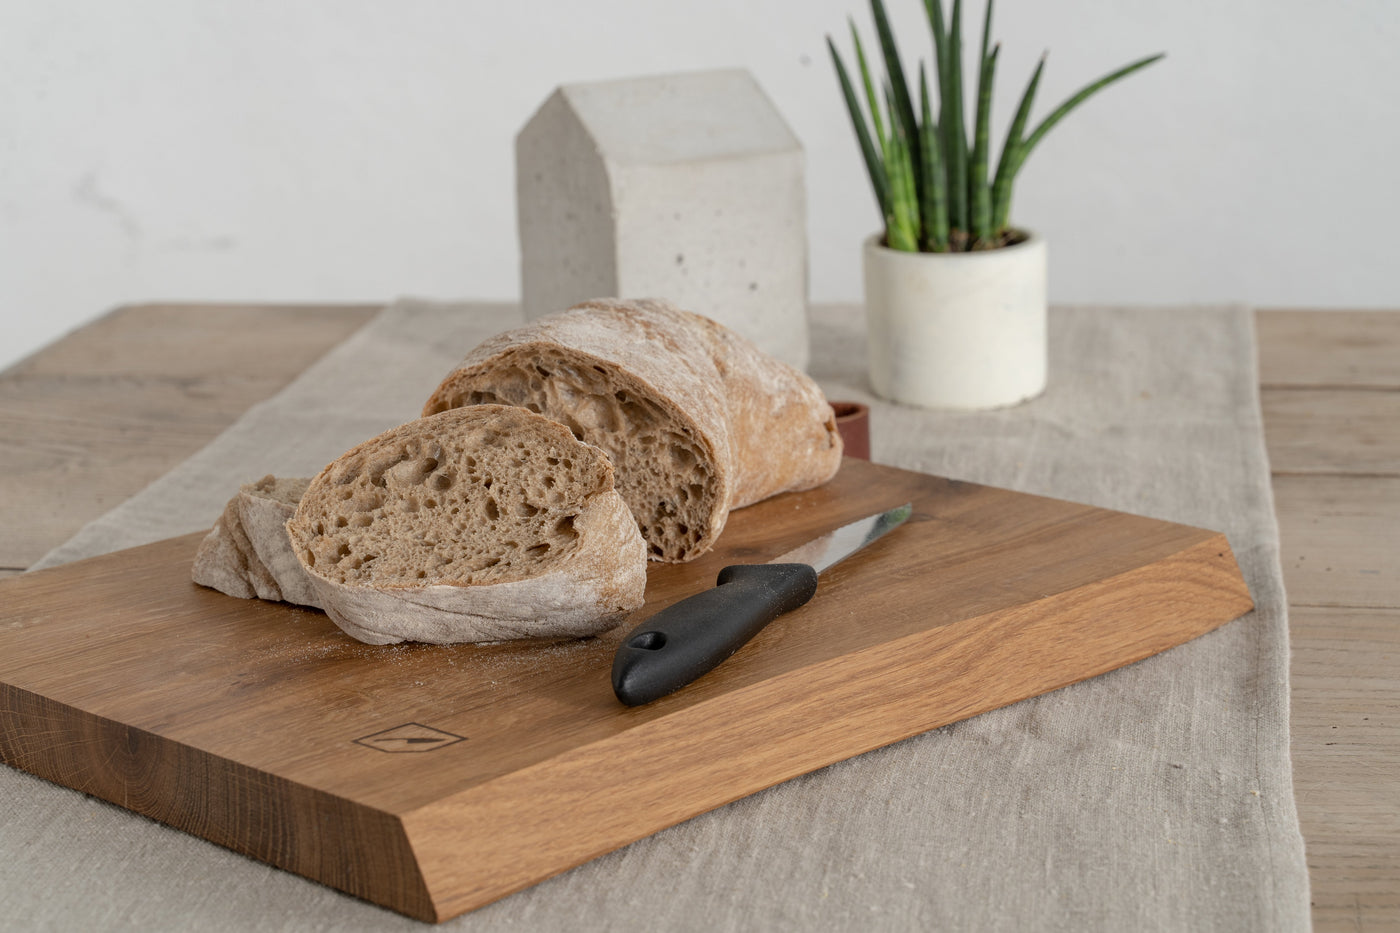 Mediea Small Oak Cutting Board-Cooking and Eating-COOKING/SERVING TOOLS, TABLEWARE, TRAYS / BOARDS-Forest Homes-Nature inspired decor-Nature decor